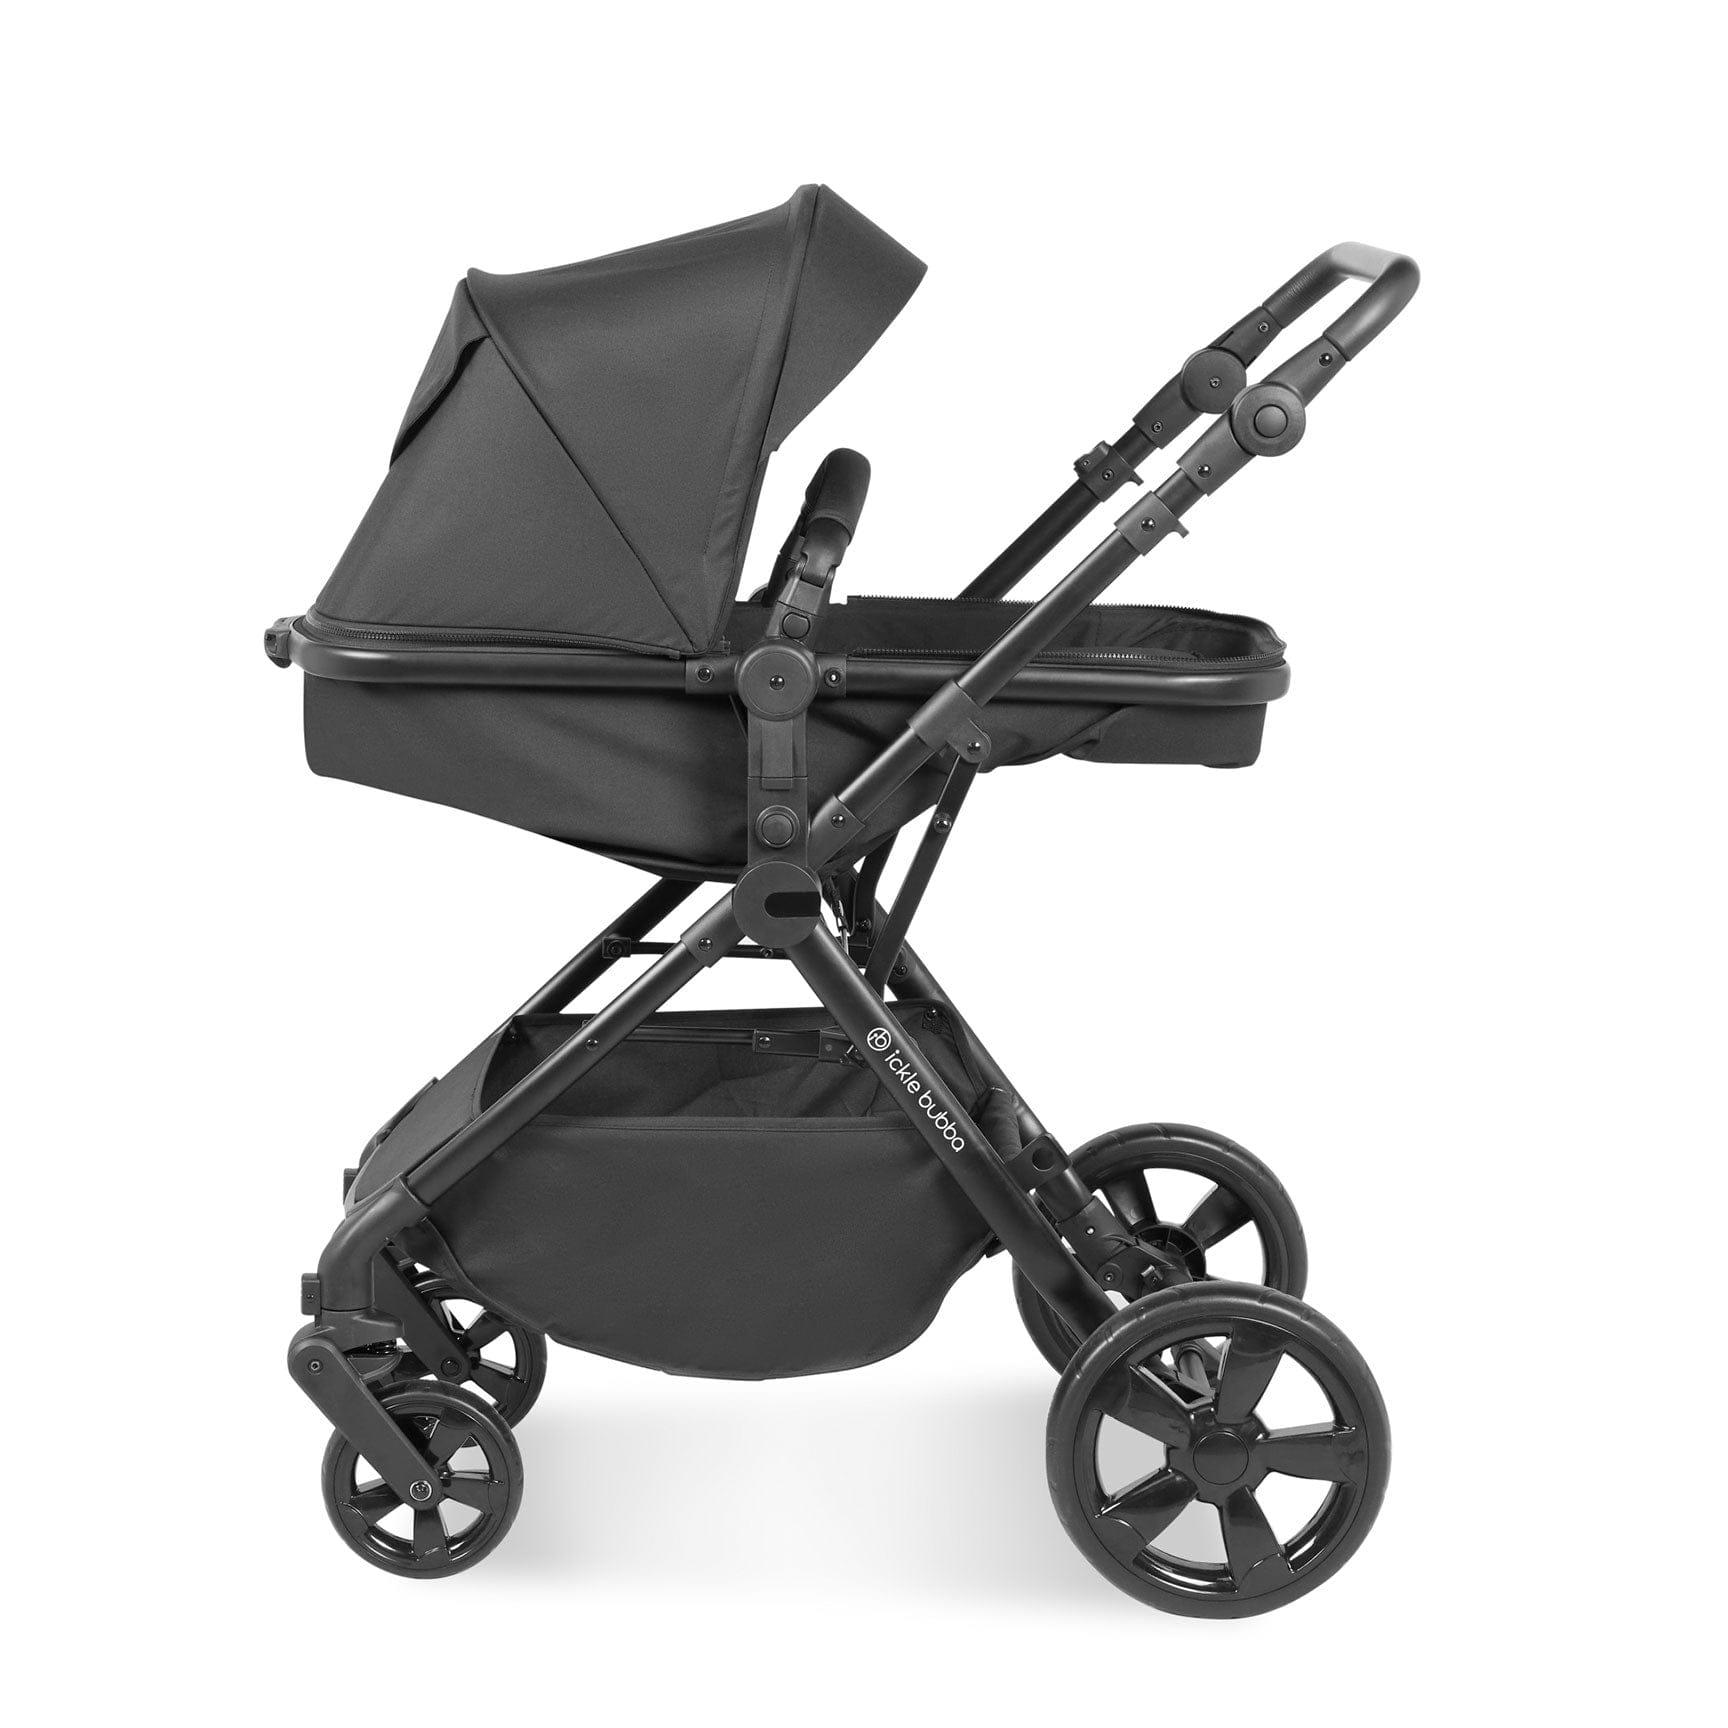 Ickle Bubba baby prams Ickle Bubba Comet 2-in-1 Plus Carrycot & Pushchair - Black 10-008-001-002